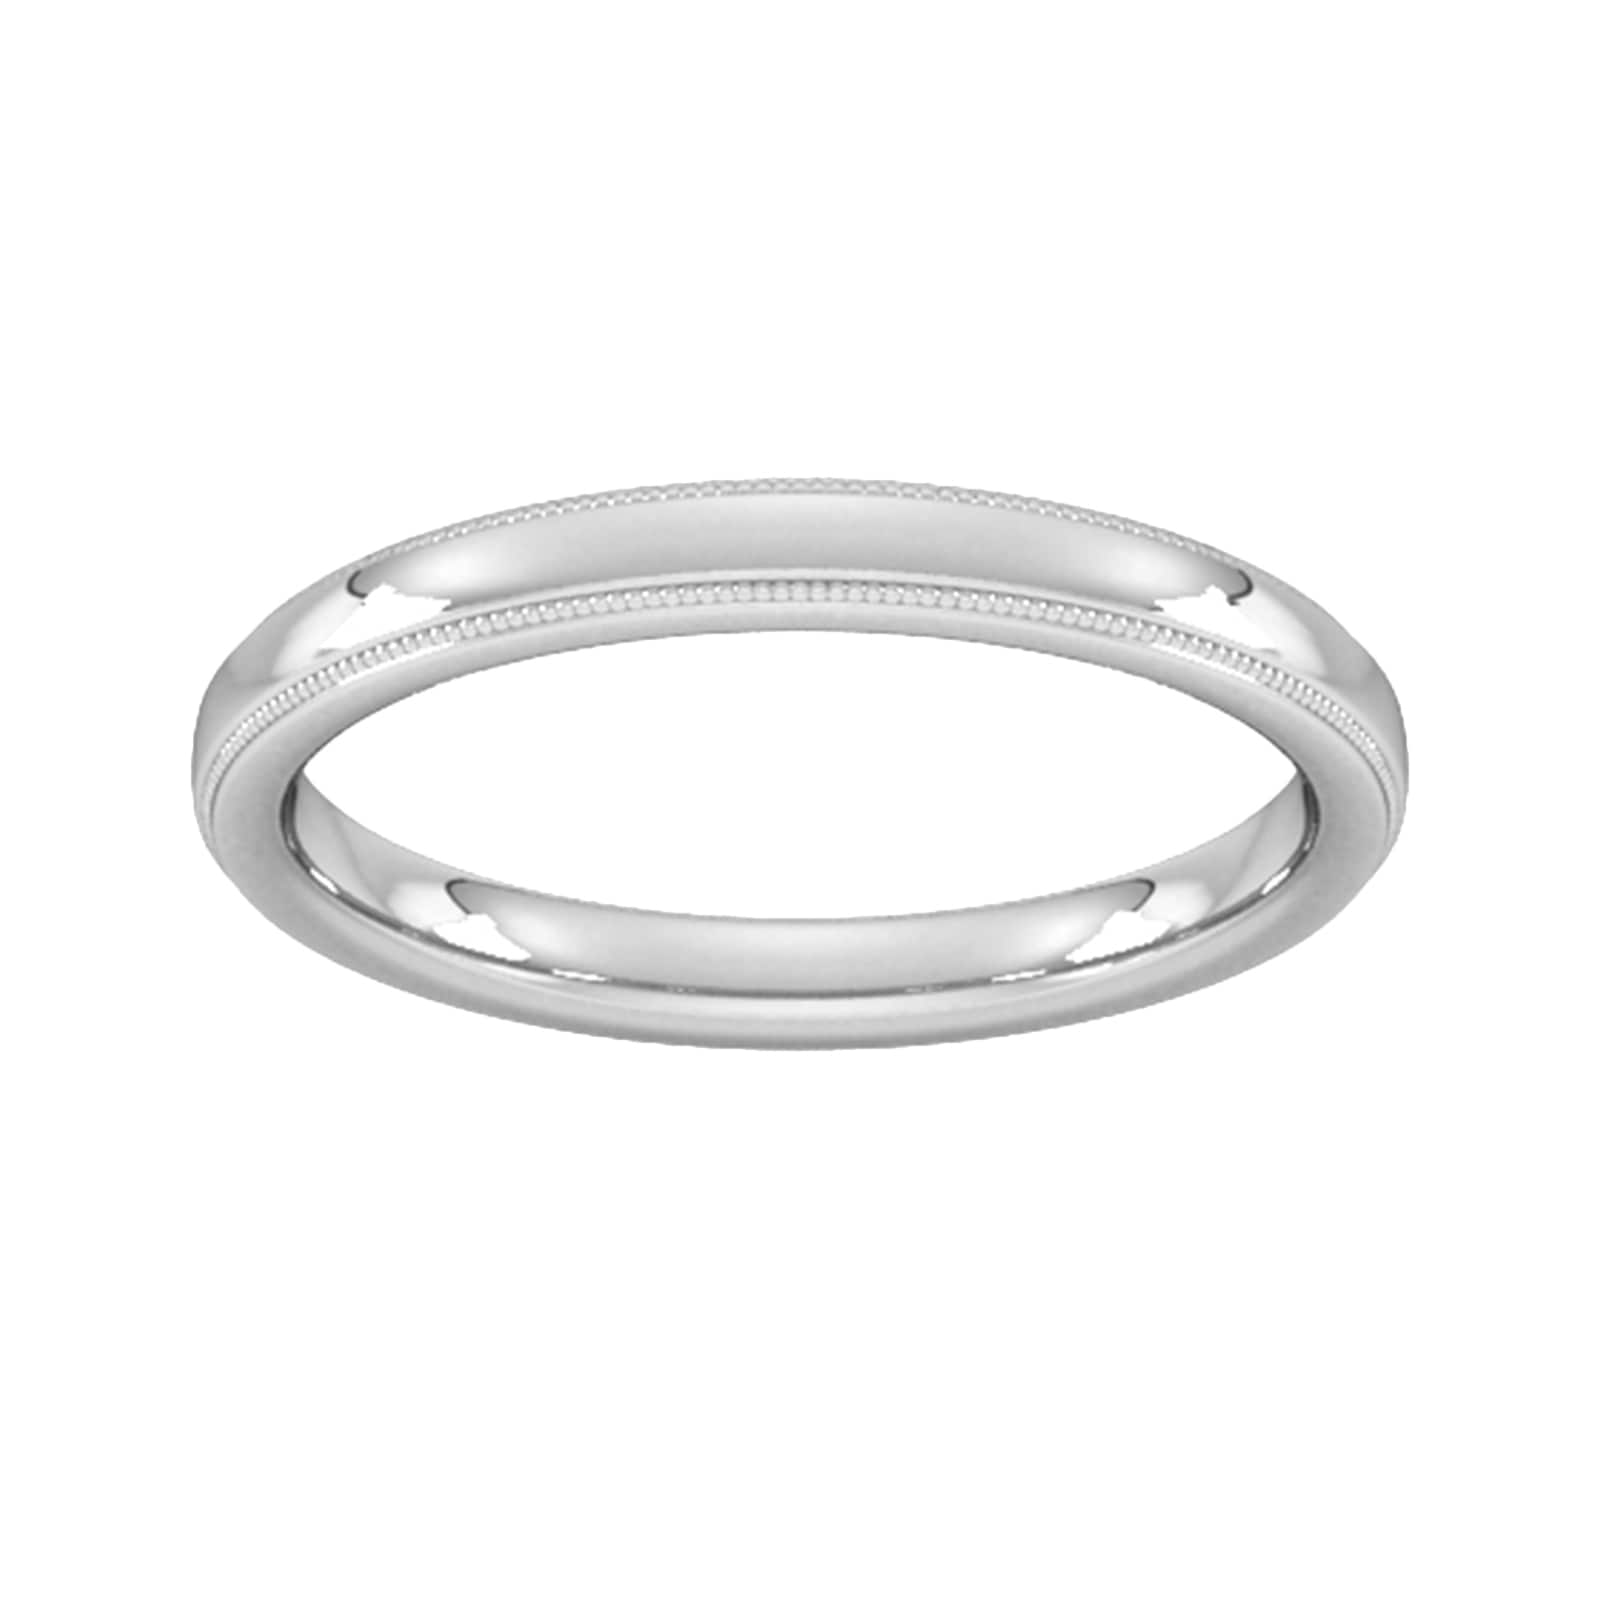 2.5mm Traditional Court Standard Milgrain Edge Wedding Ring In 9 Carat White Gold - Ring Size L